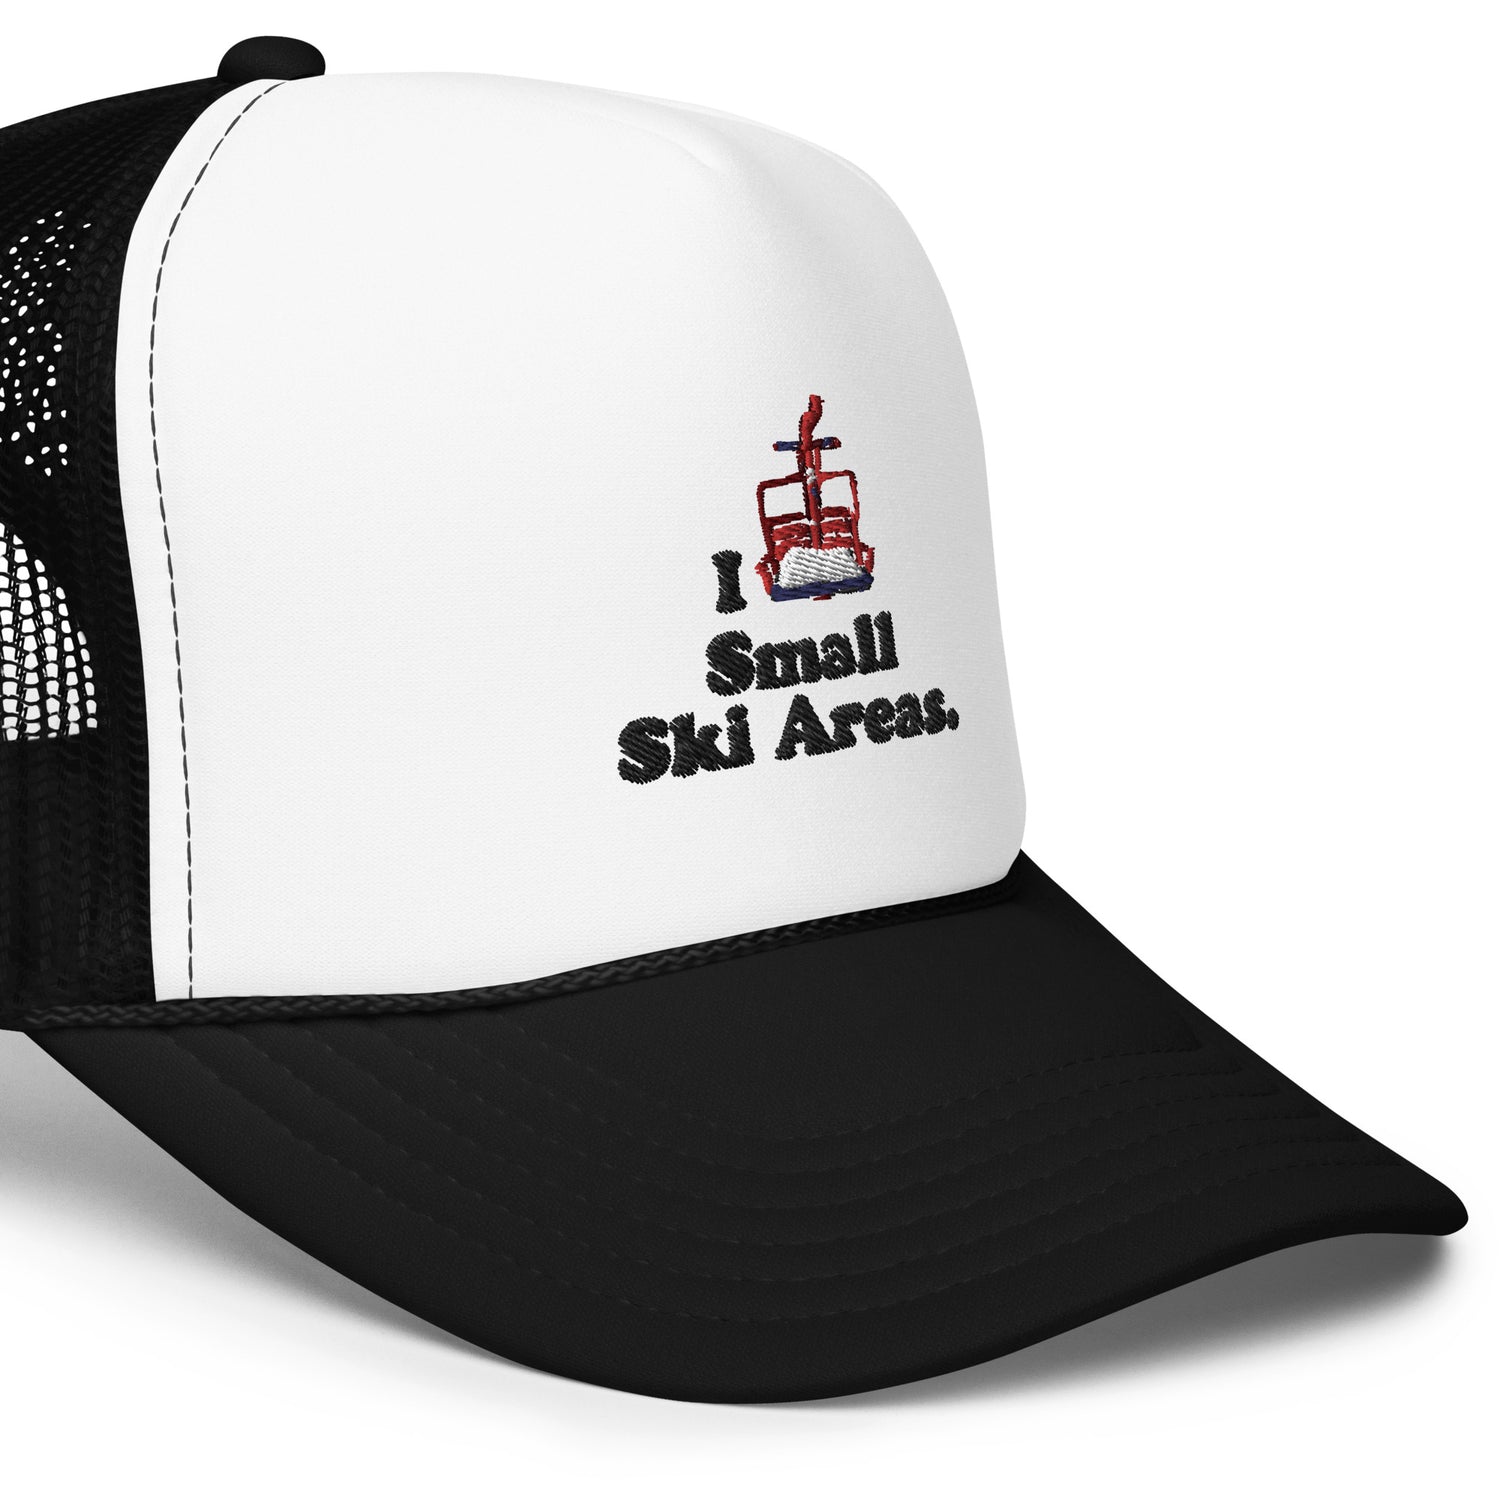 Black Unisex Trucker Snapback Hat with the text I Love Small Ski Areas